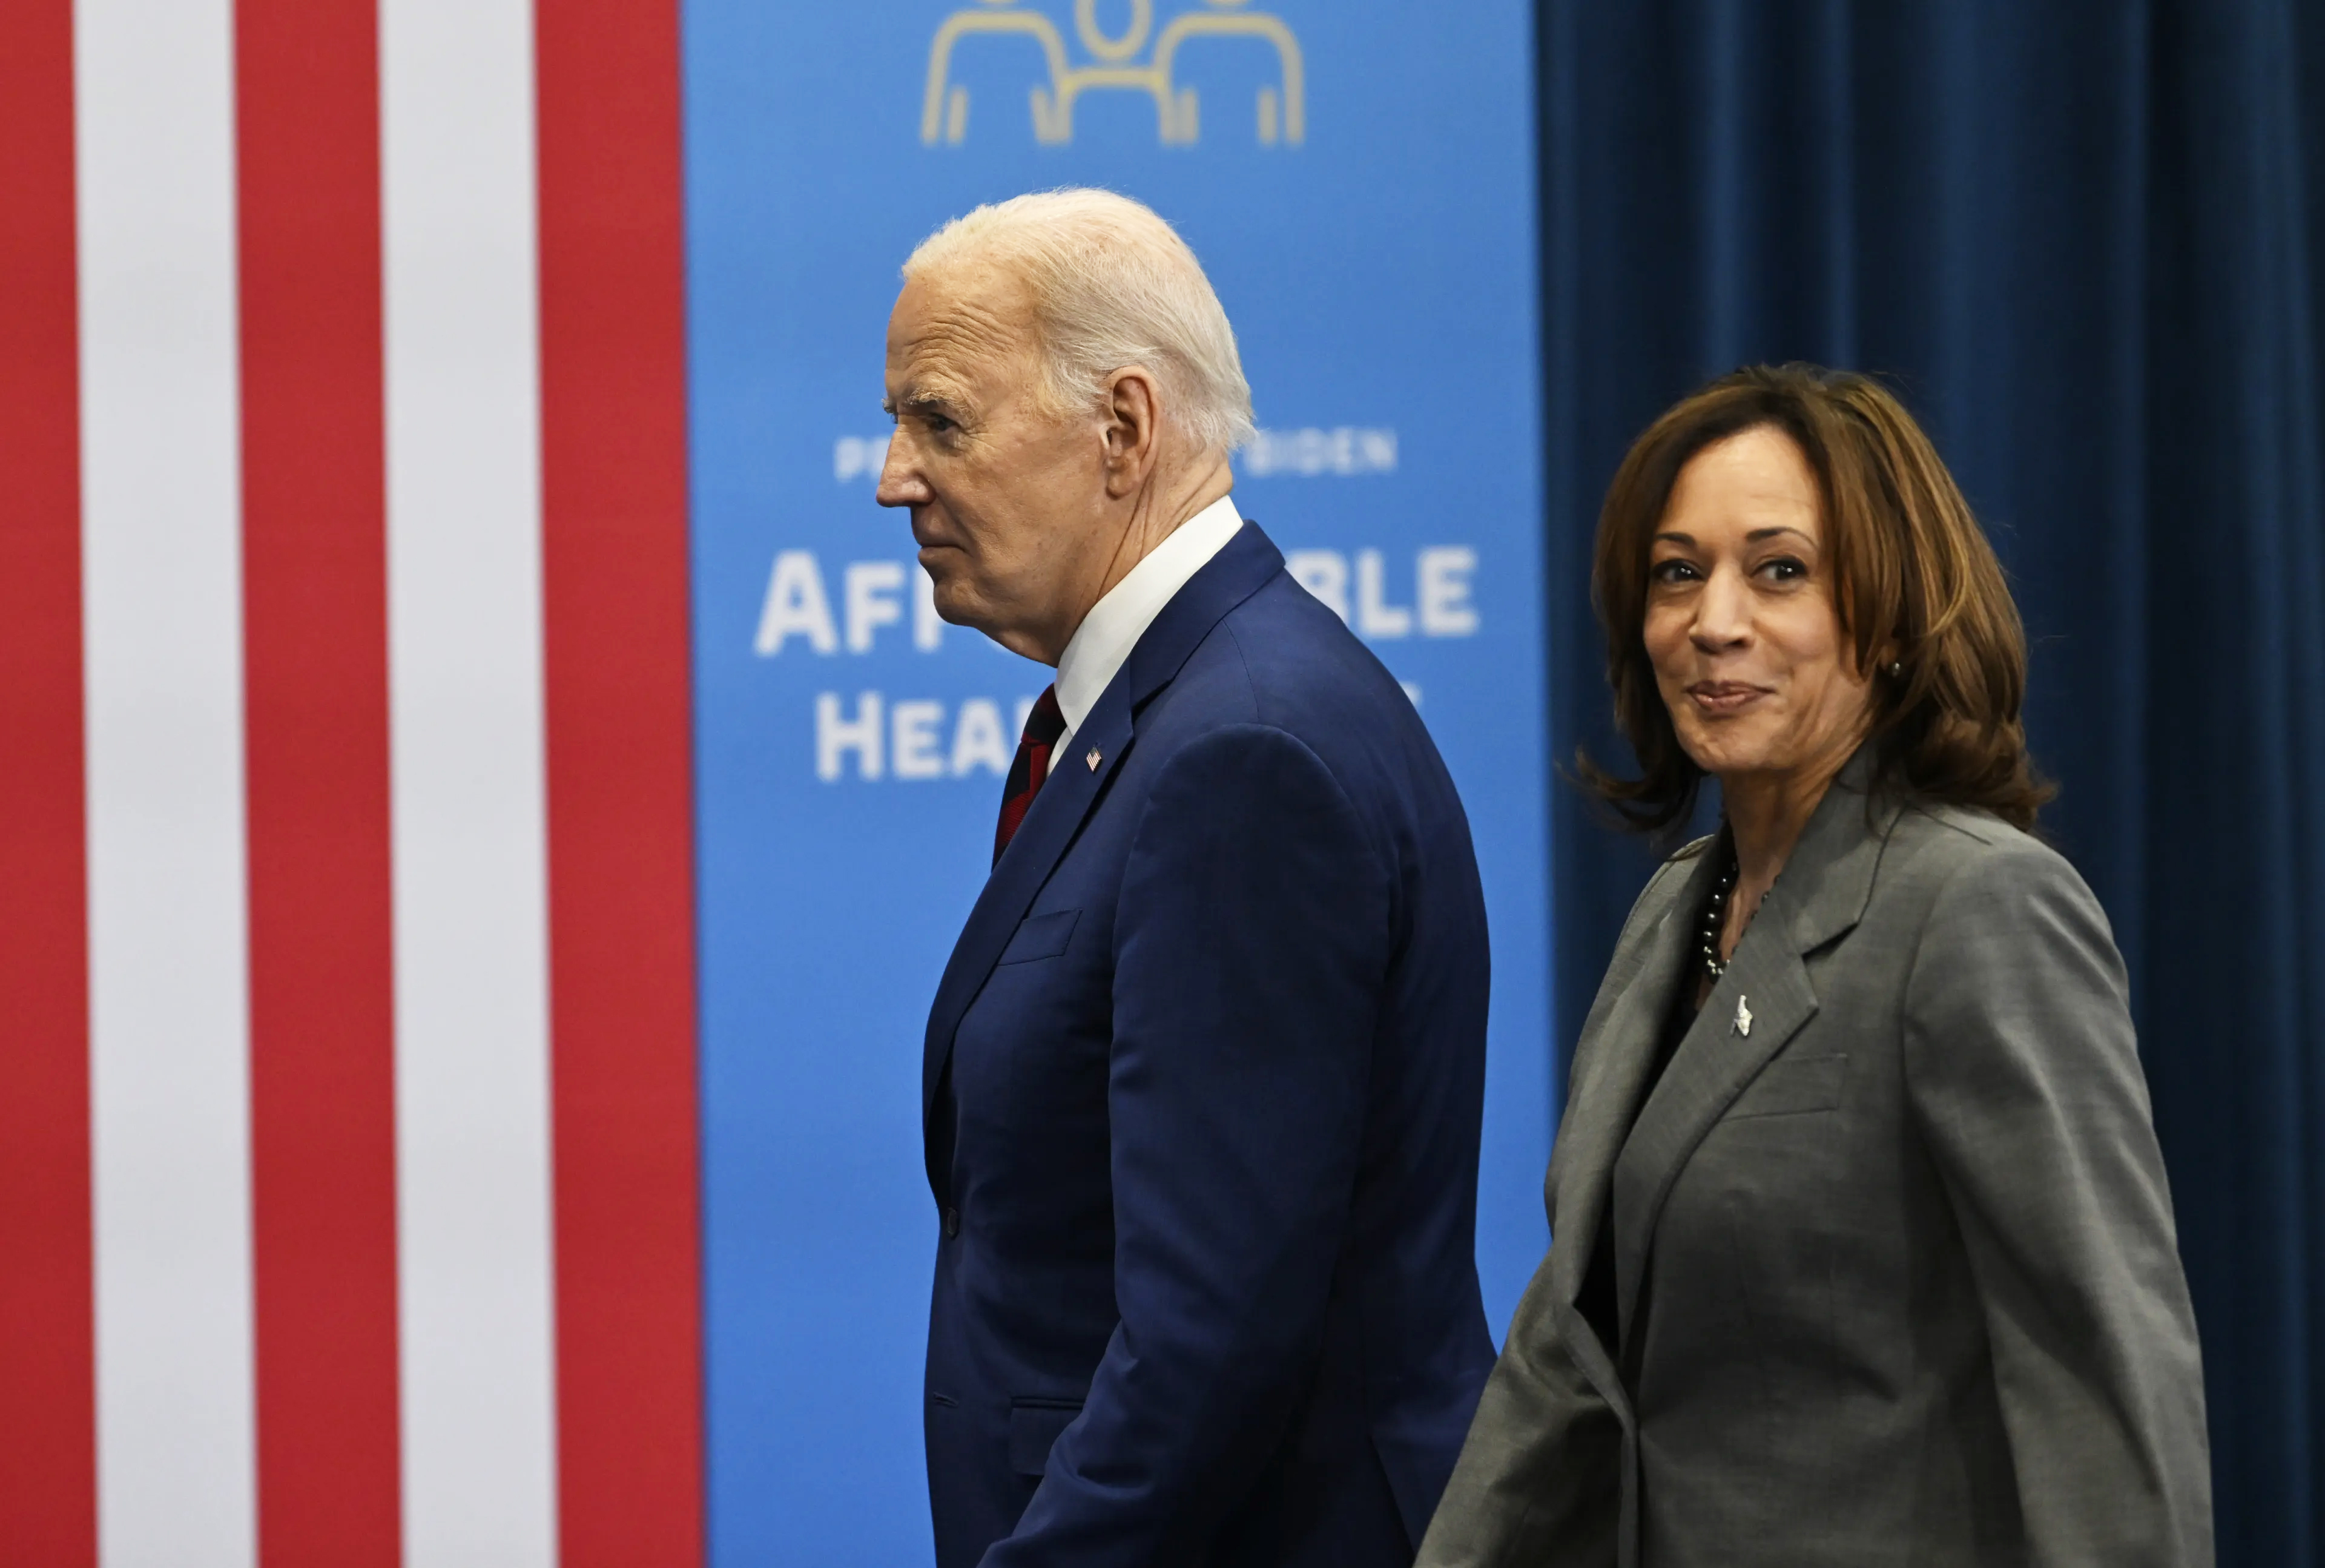 A man in a blue suit and a woman in a gray suit walk in front of a backdrop with the U.S. flag and text promoting affordable healthcare.